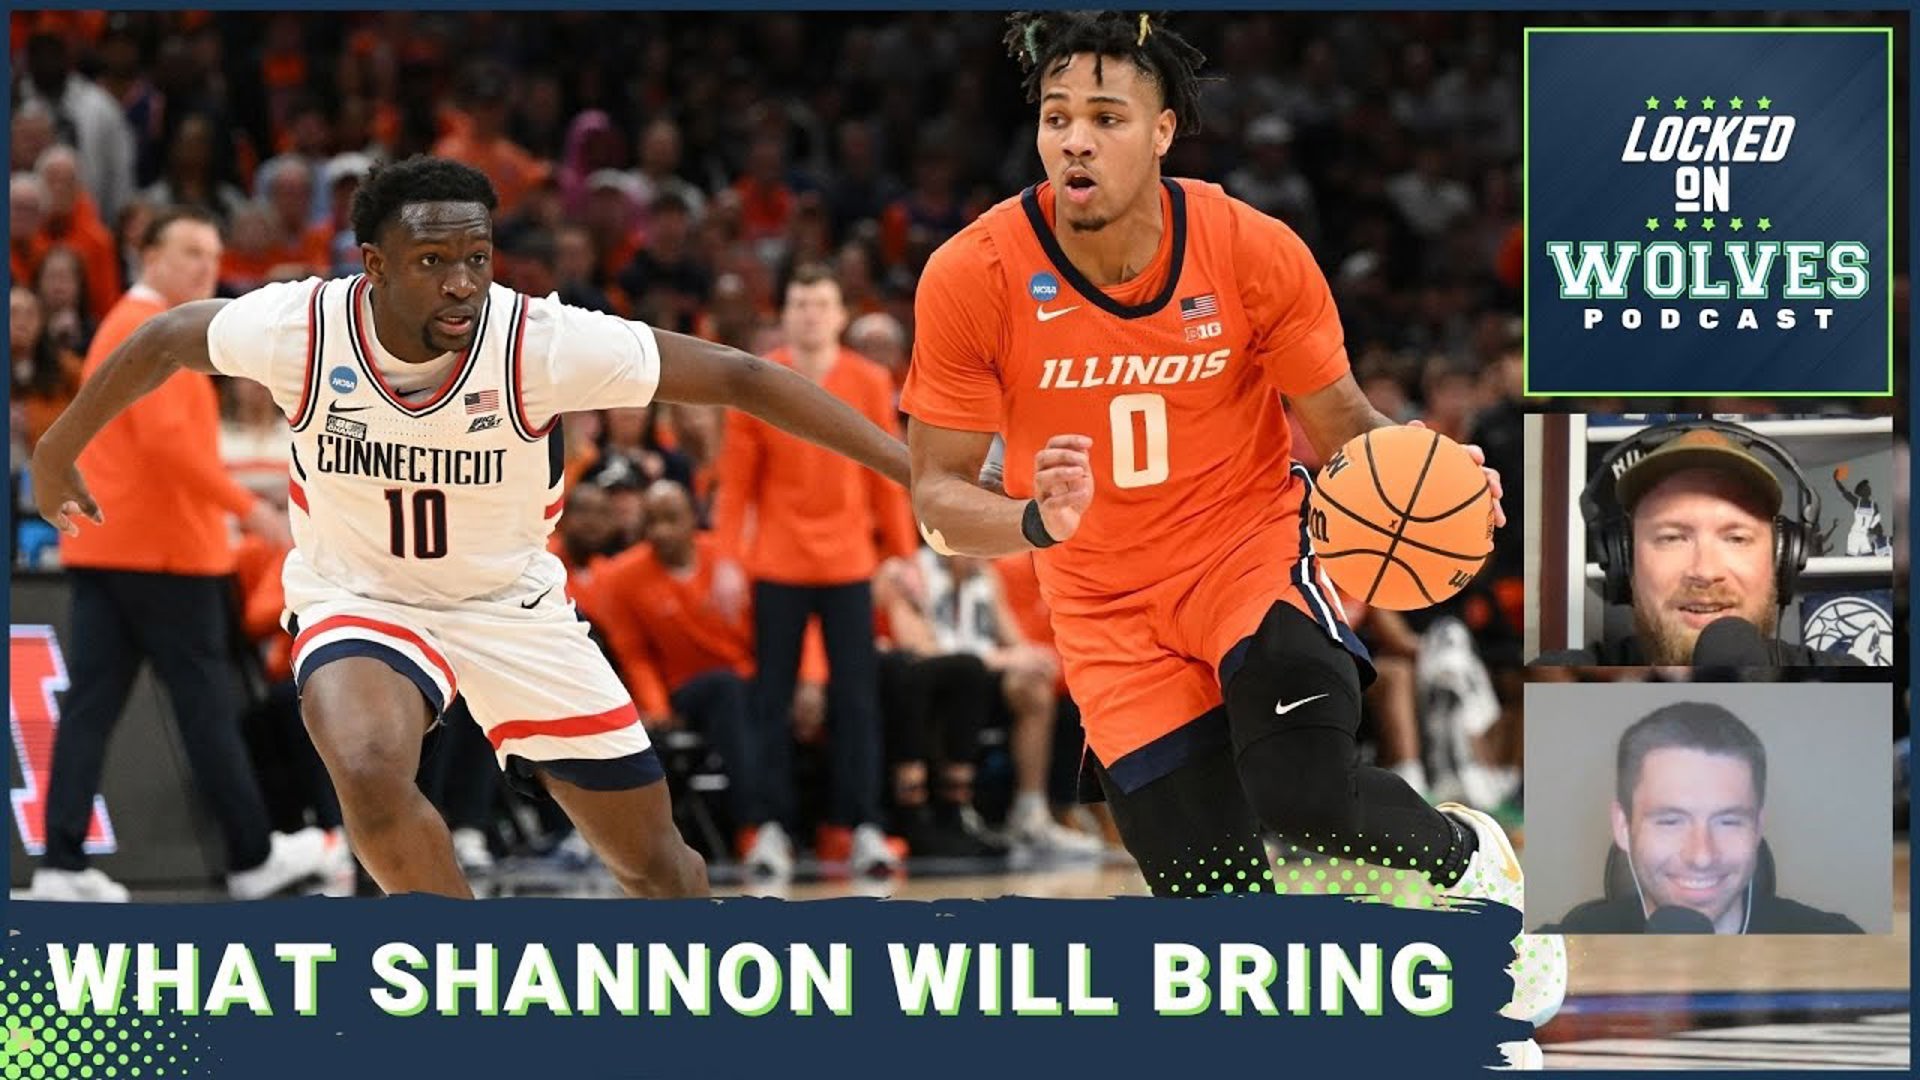 NBA Free Agency Opens + Terrance Shannon Jr. to the Timberwolves with Tyler Metcalf of No Ceilings